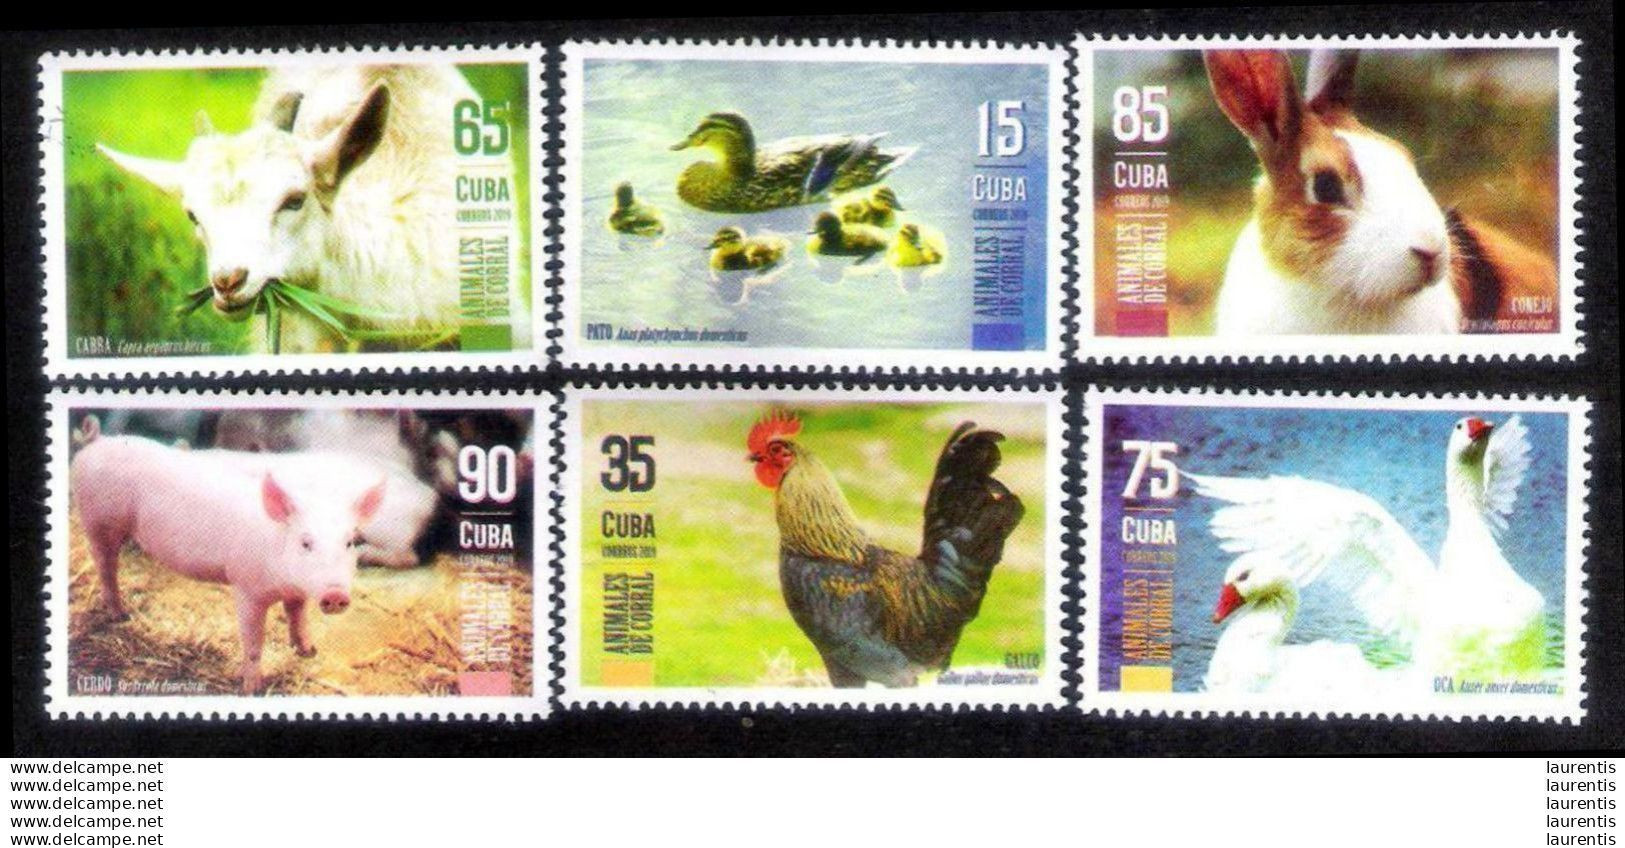 D2859  Ducks-Pigs-Roosters-Rabbits-Geese-Goats-Cows - 2019 - MNH - Cb - 2,85 - Ferme